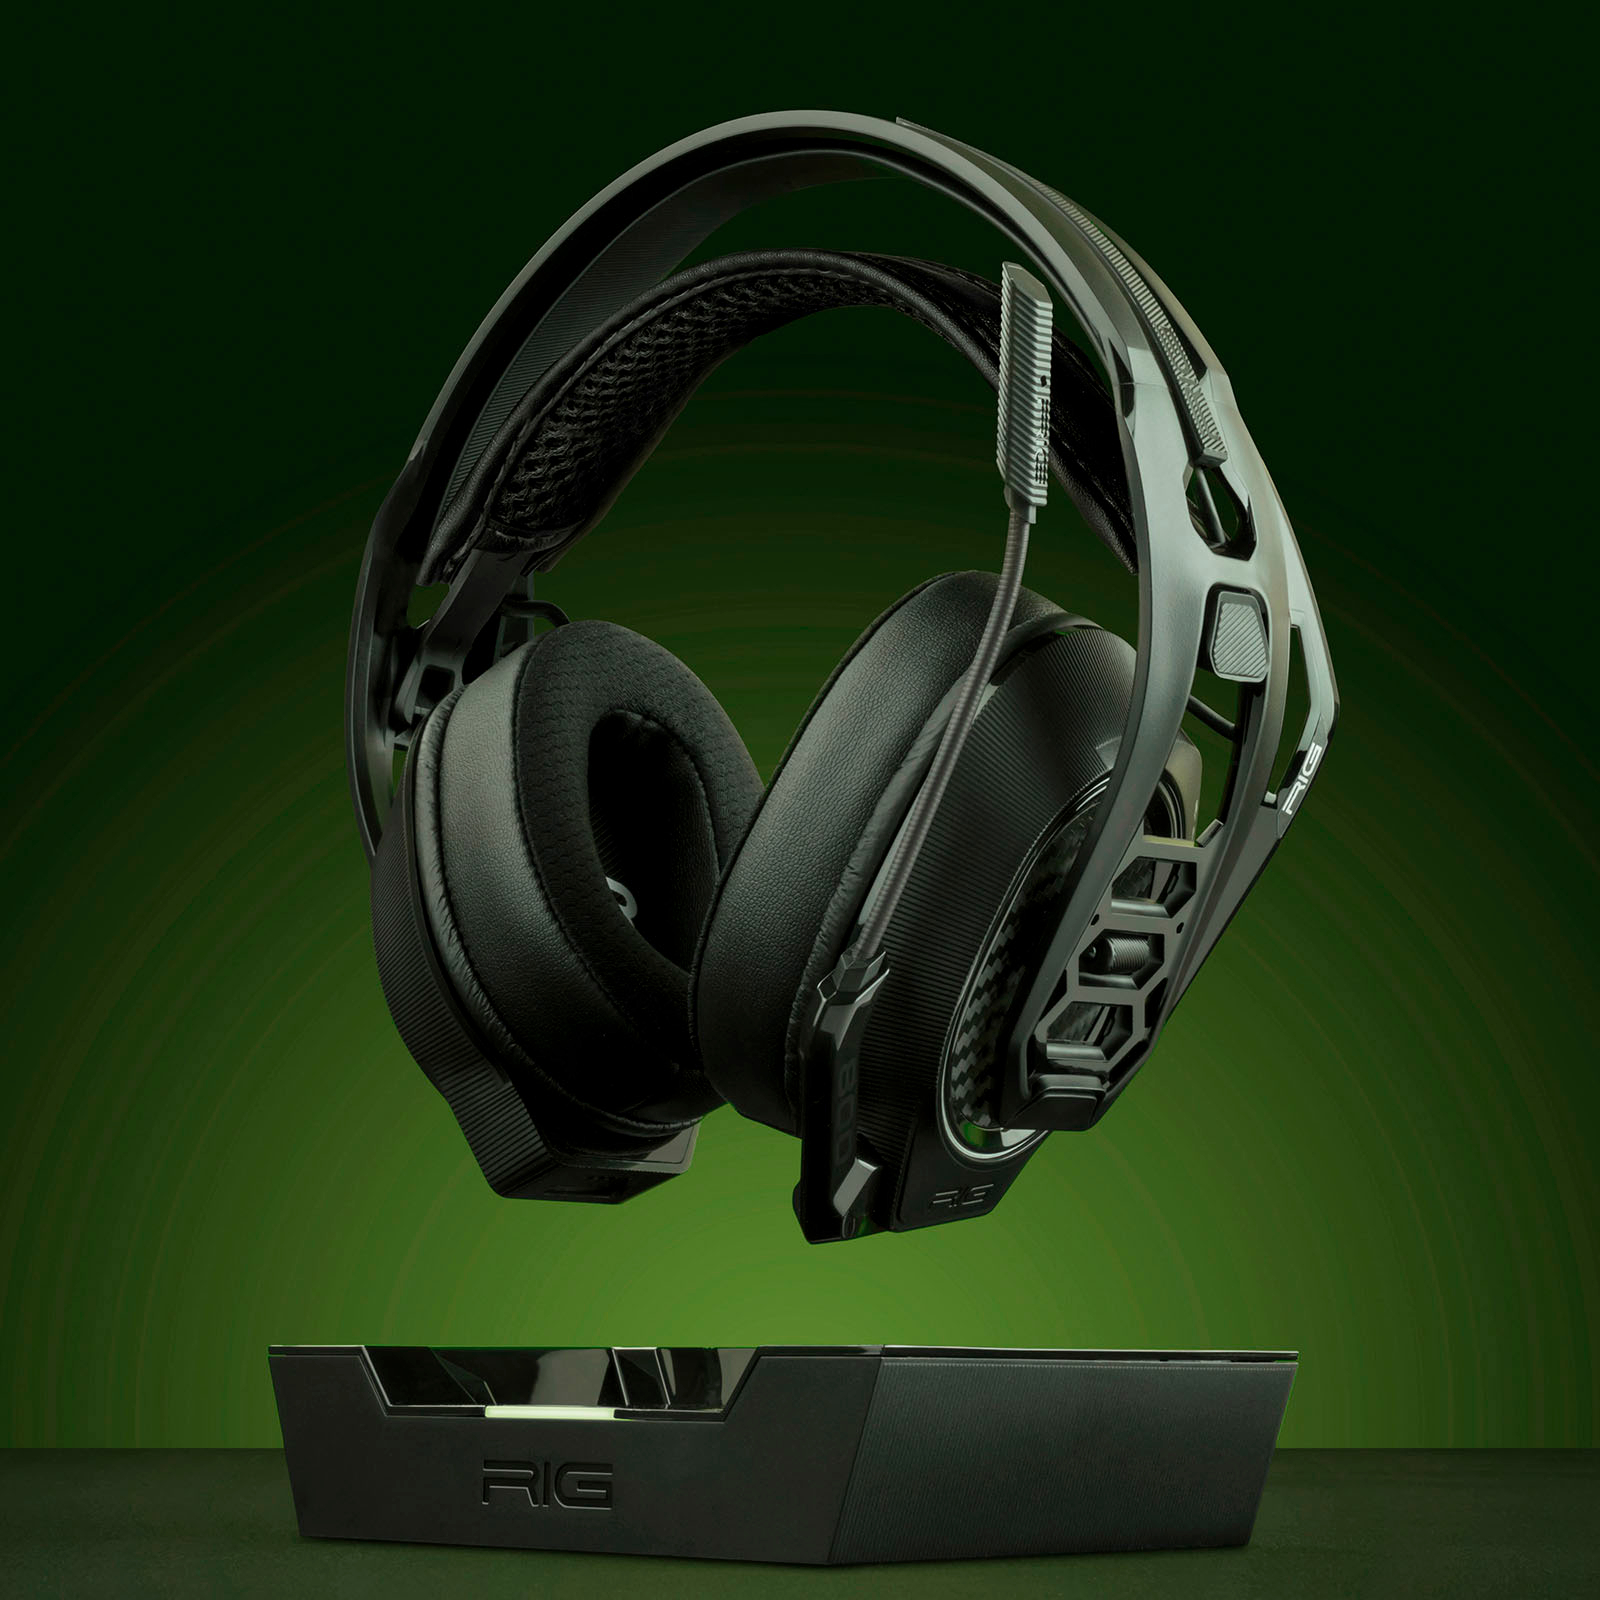 RIG 800 Pro HX Headset Black - Gaming 10-1172-01 for Wireless Best Xbox Buy